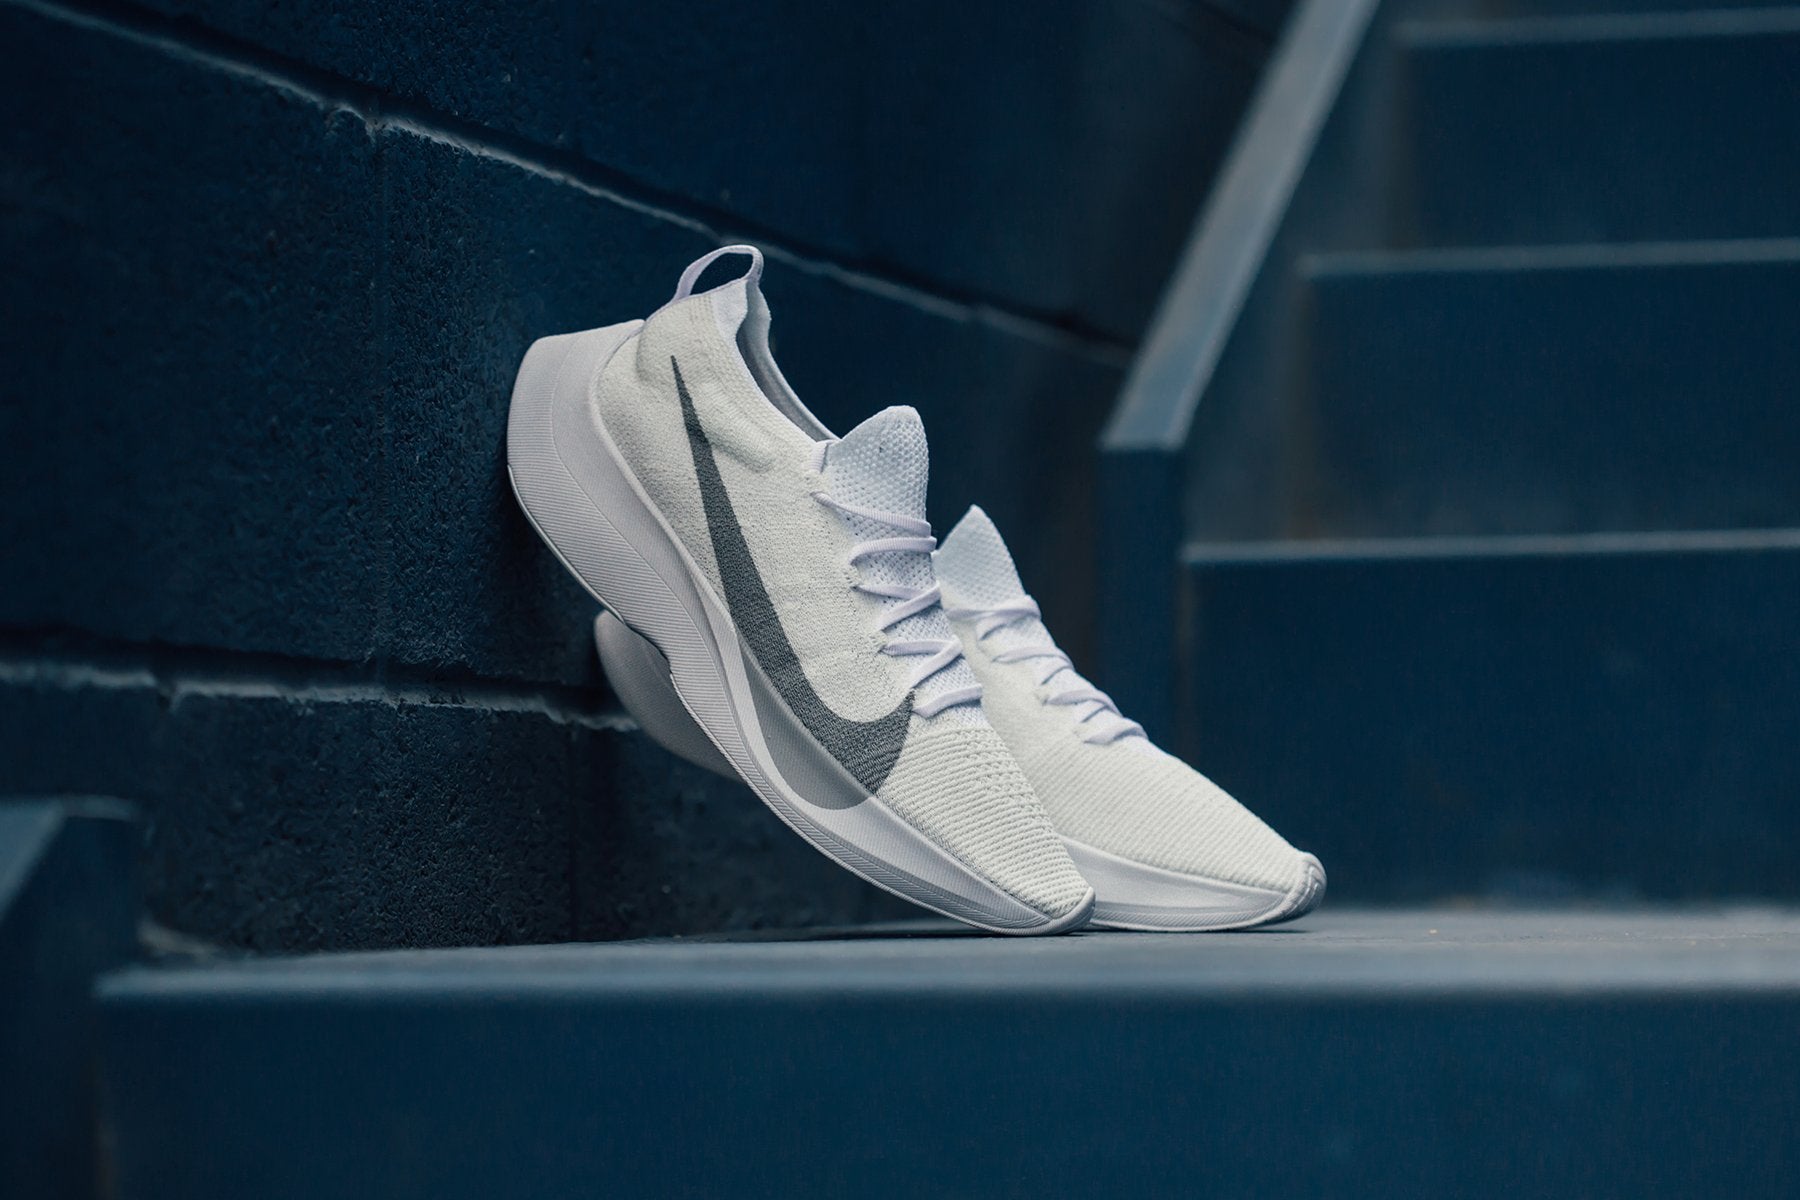 Nike Vapor Street "White/Wolf Grey" Coming Soon – Feature